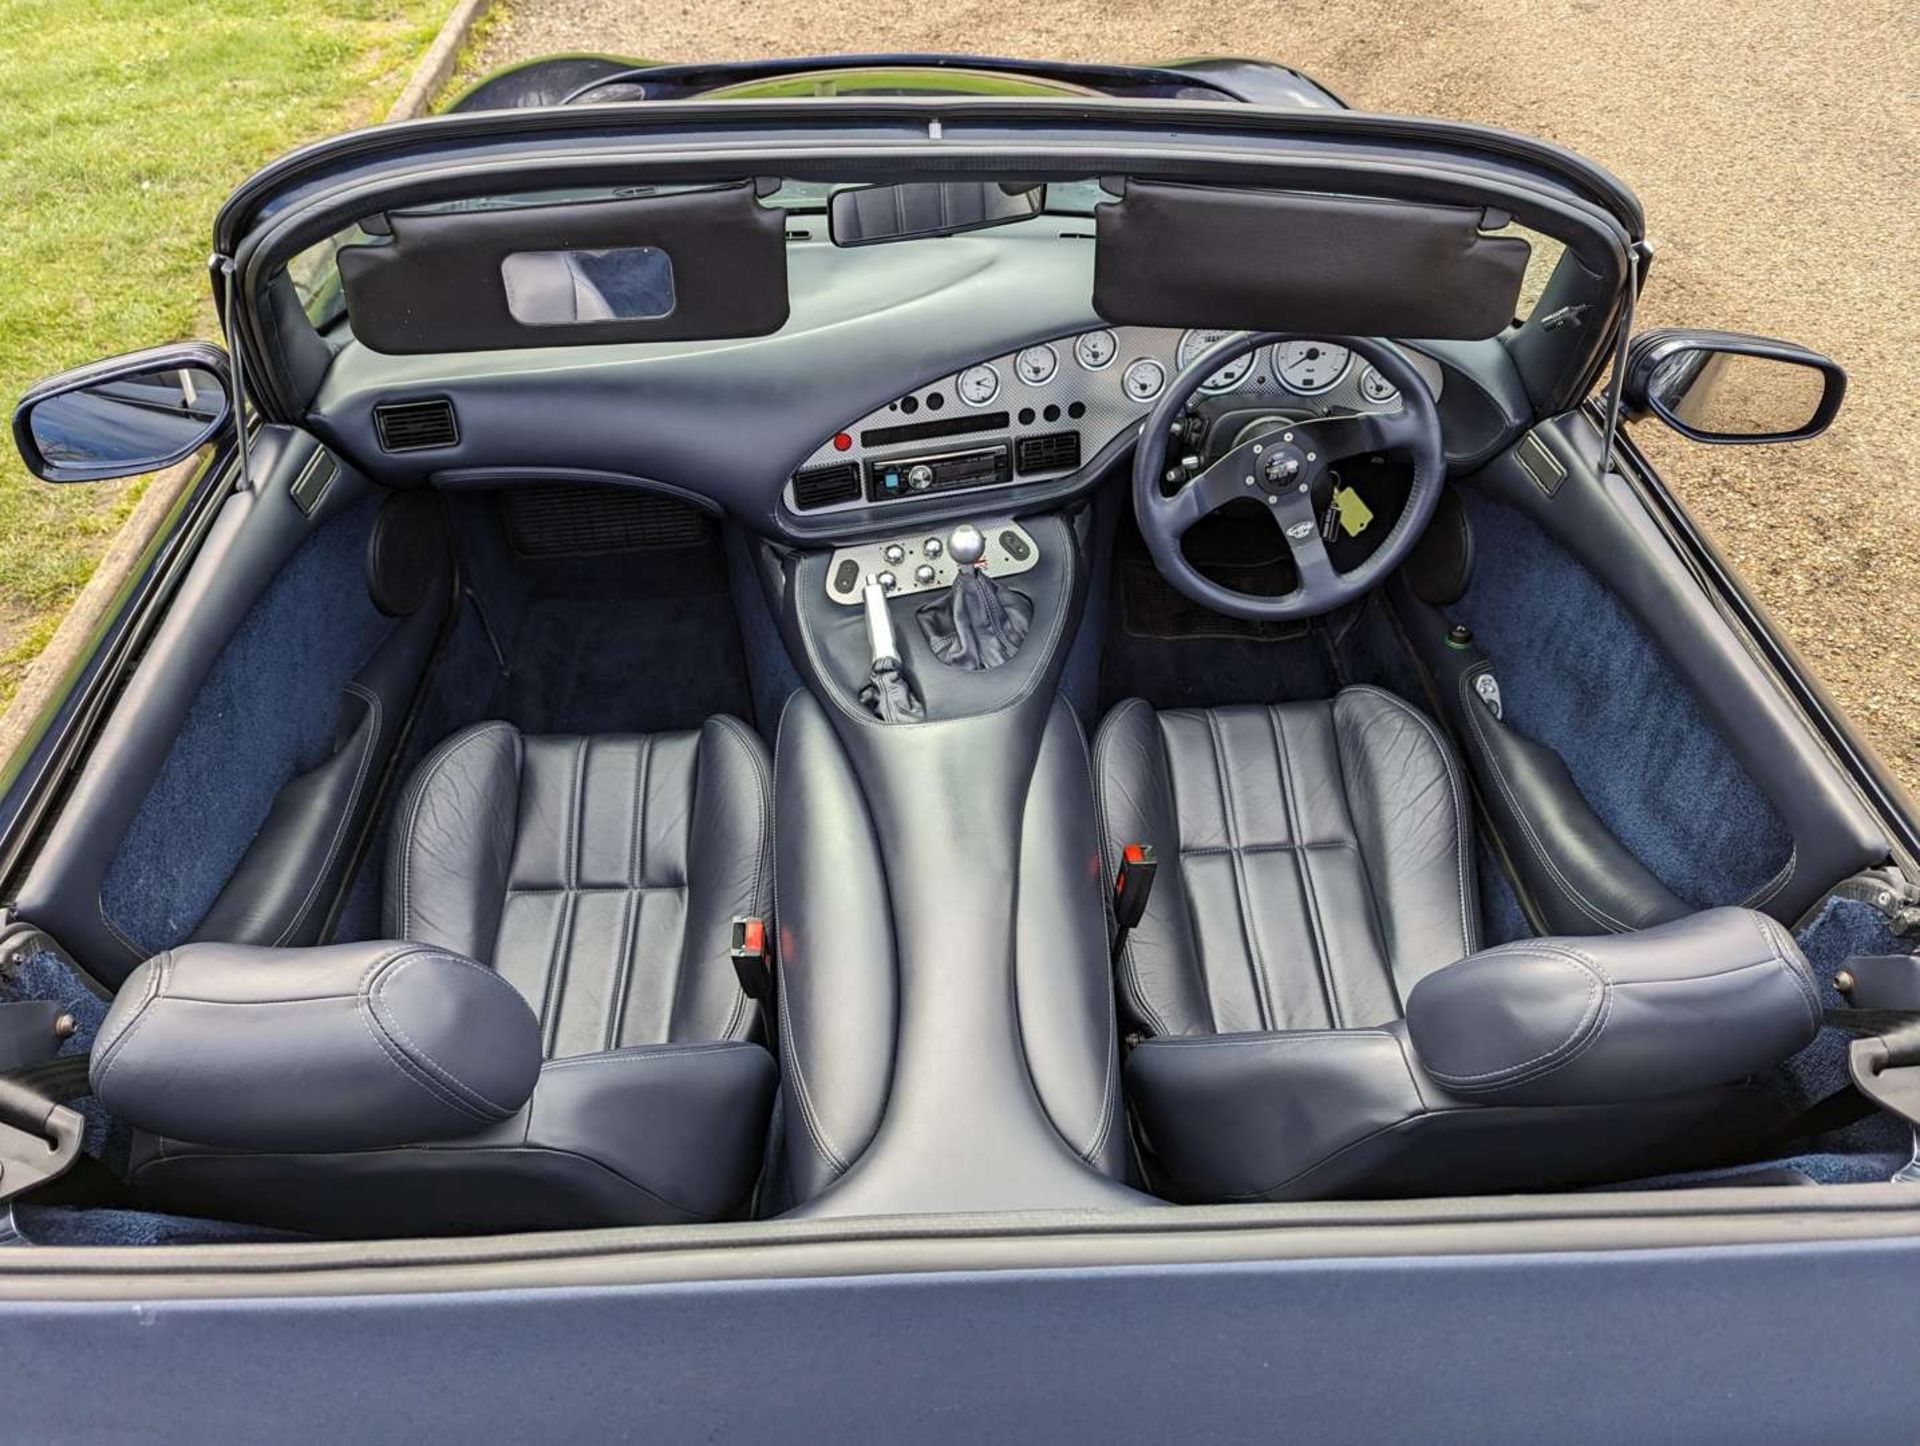 1997 TVR GRIFFITH 5.0 - Image 25 of 29